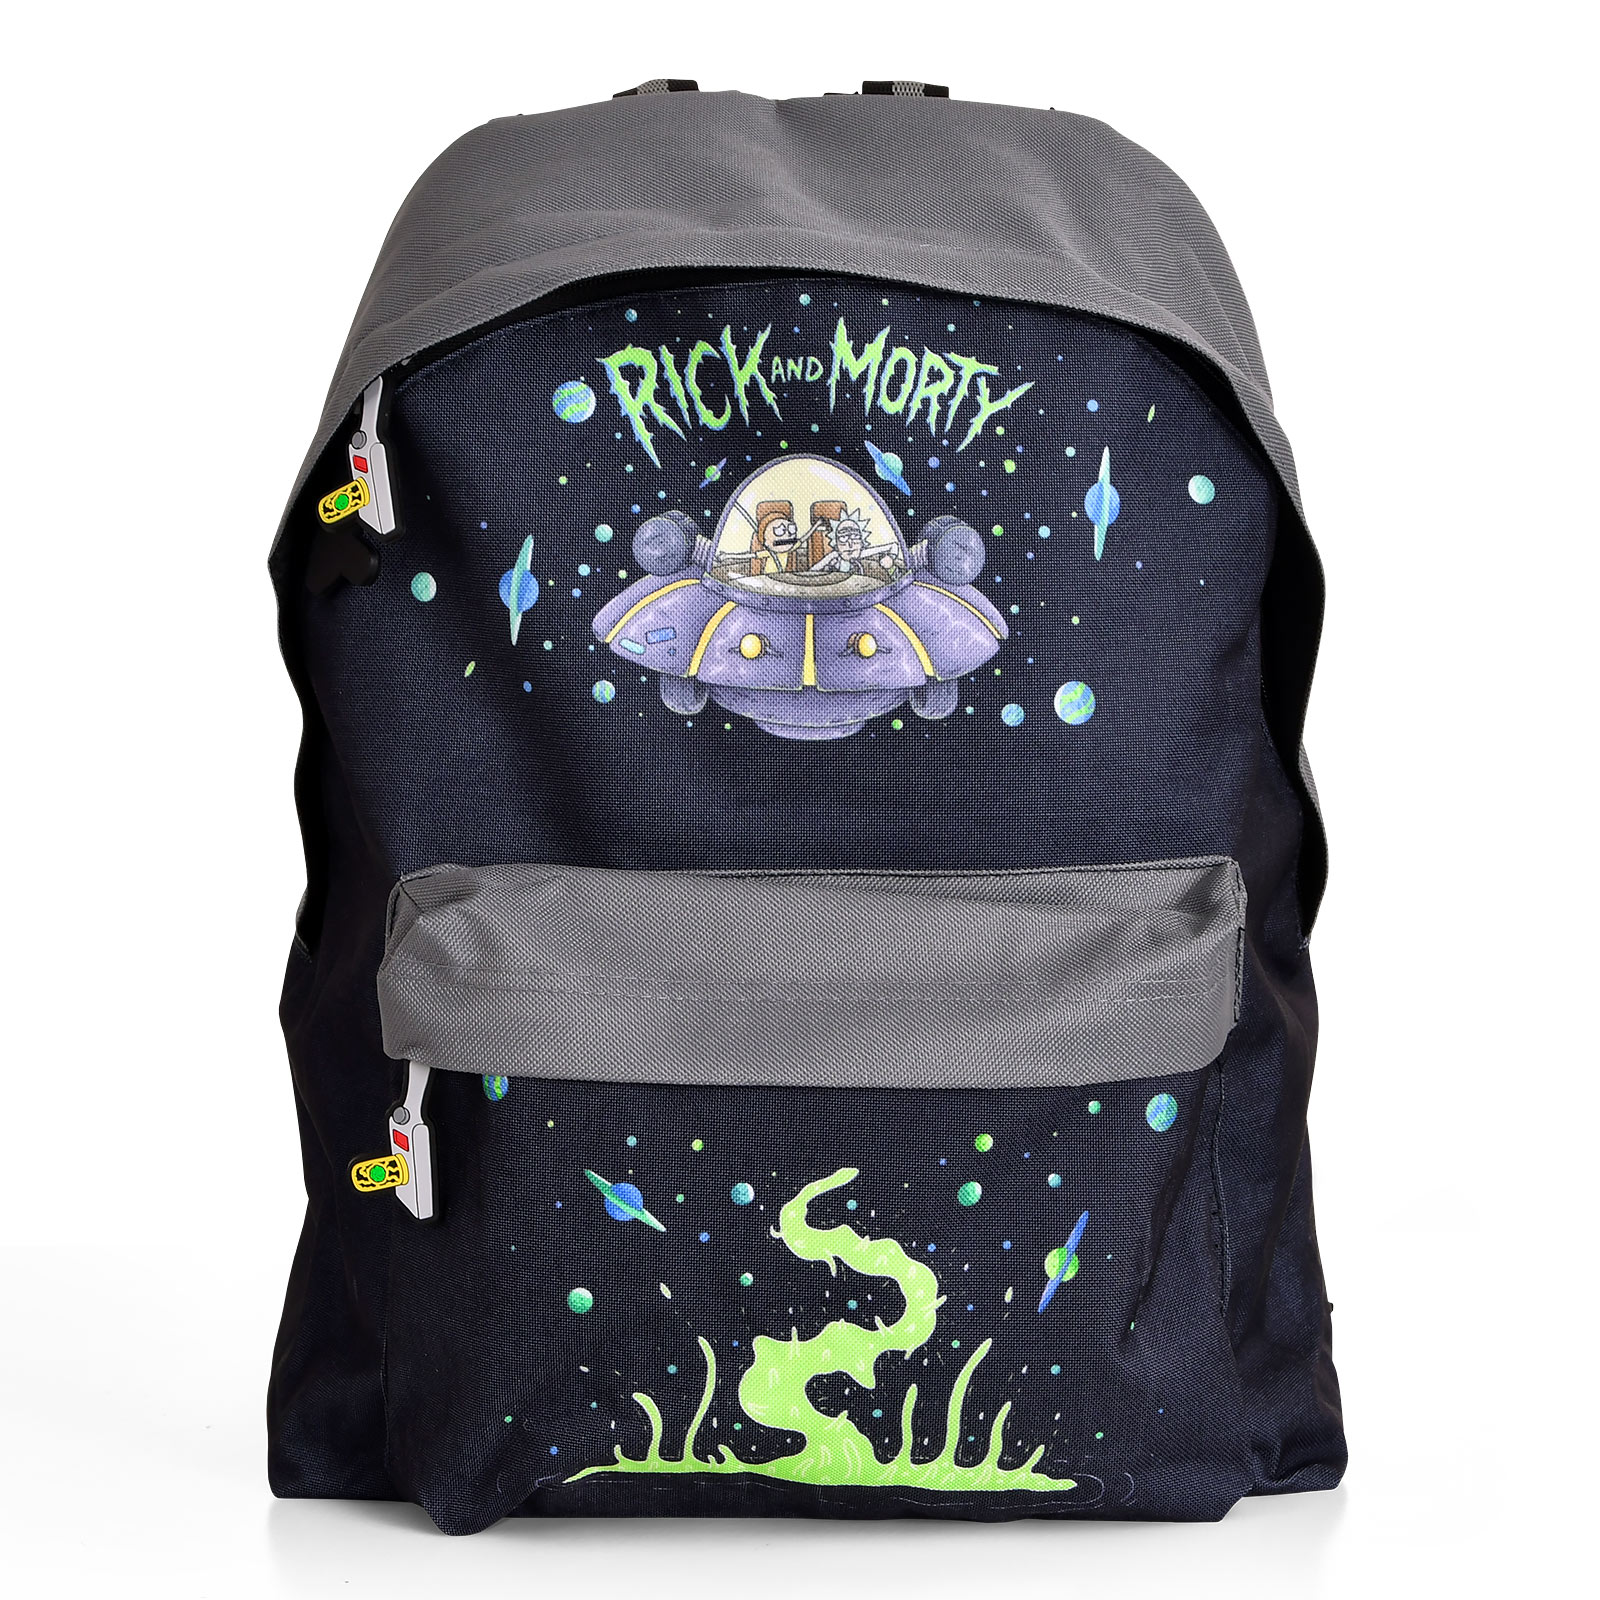 Rick and Morty - Space Cruiser Rucksack